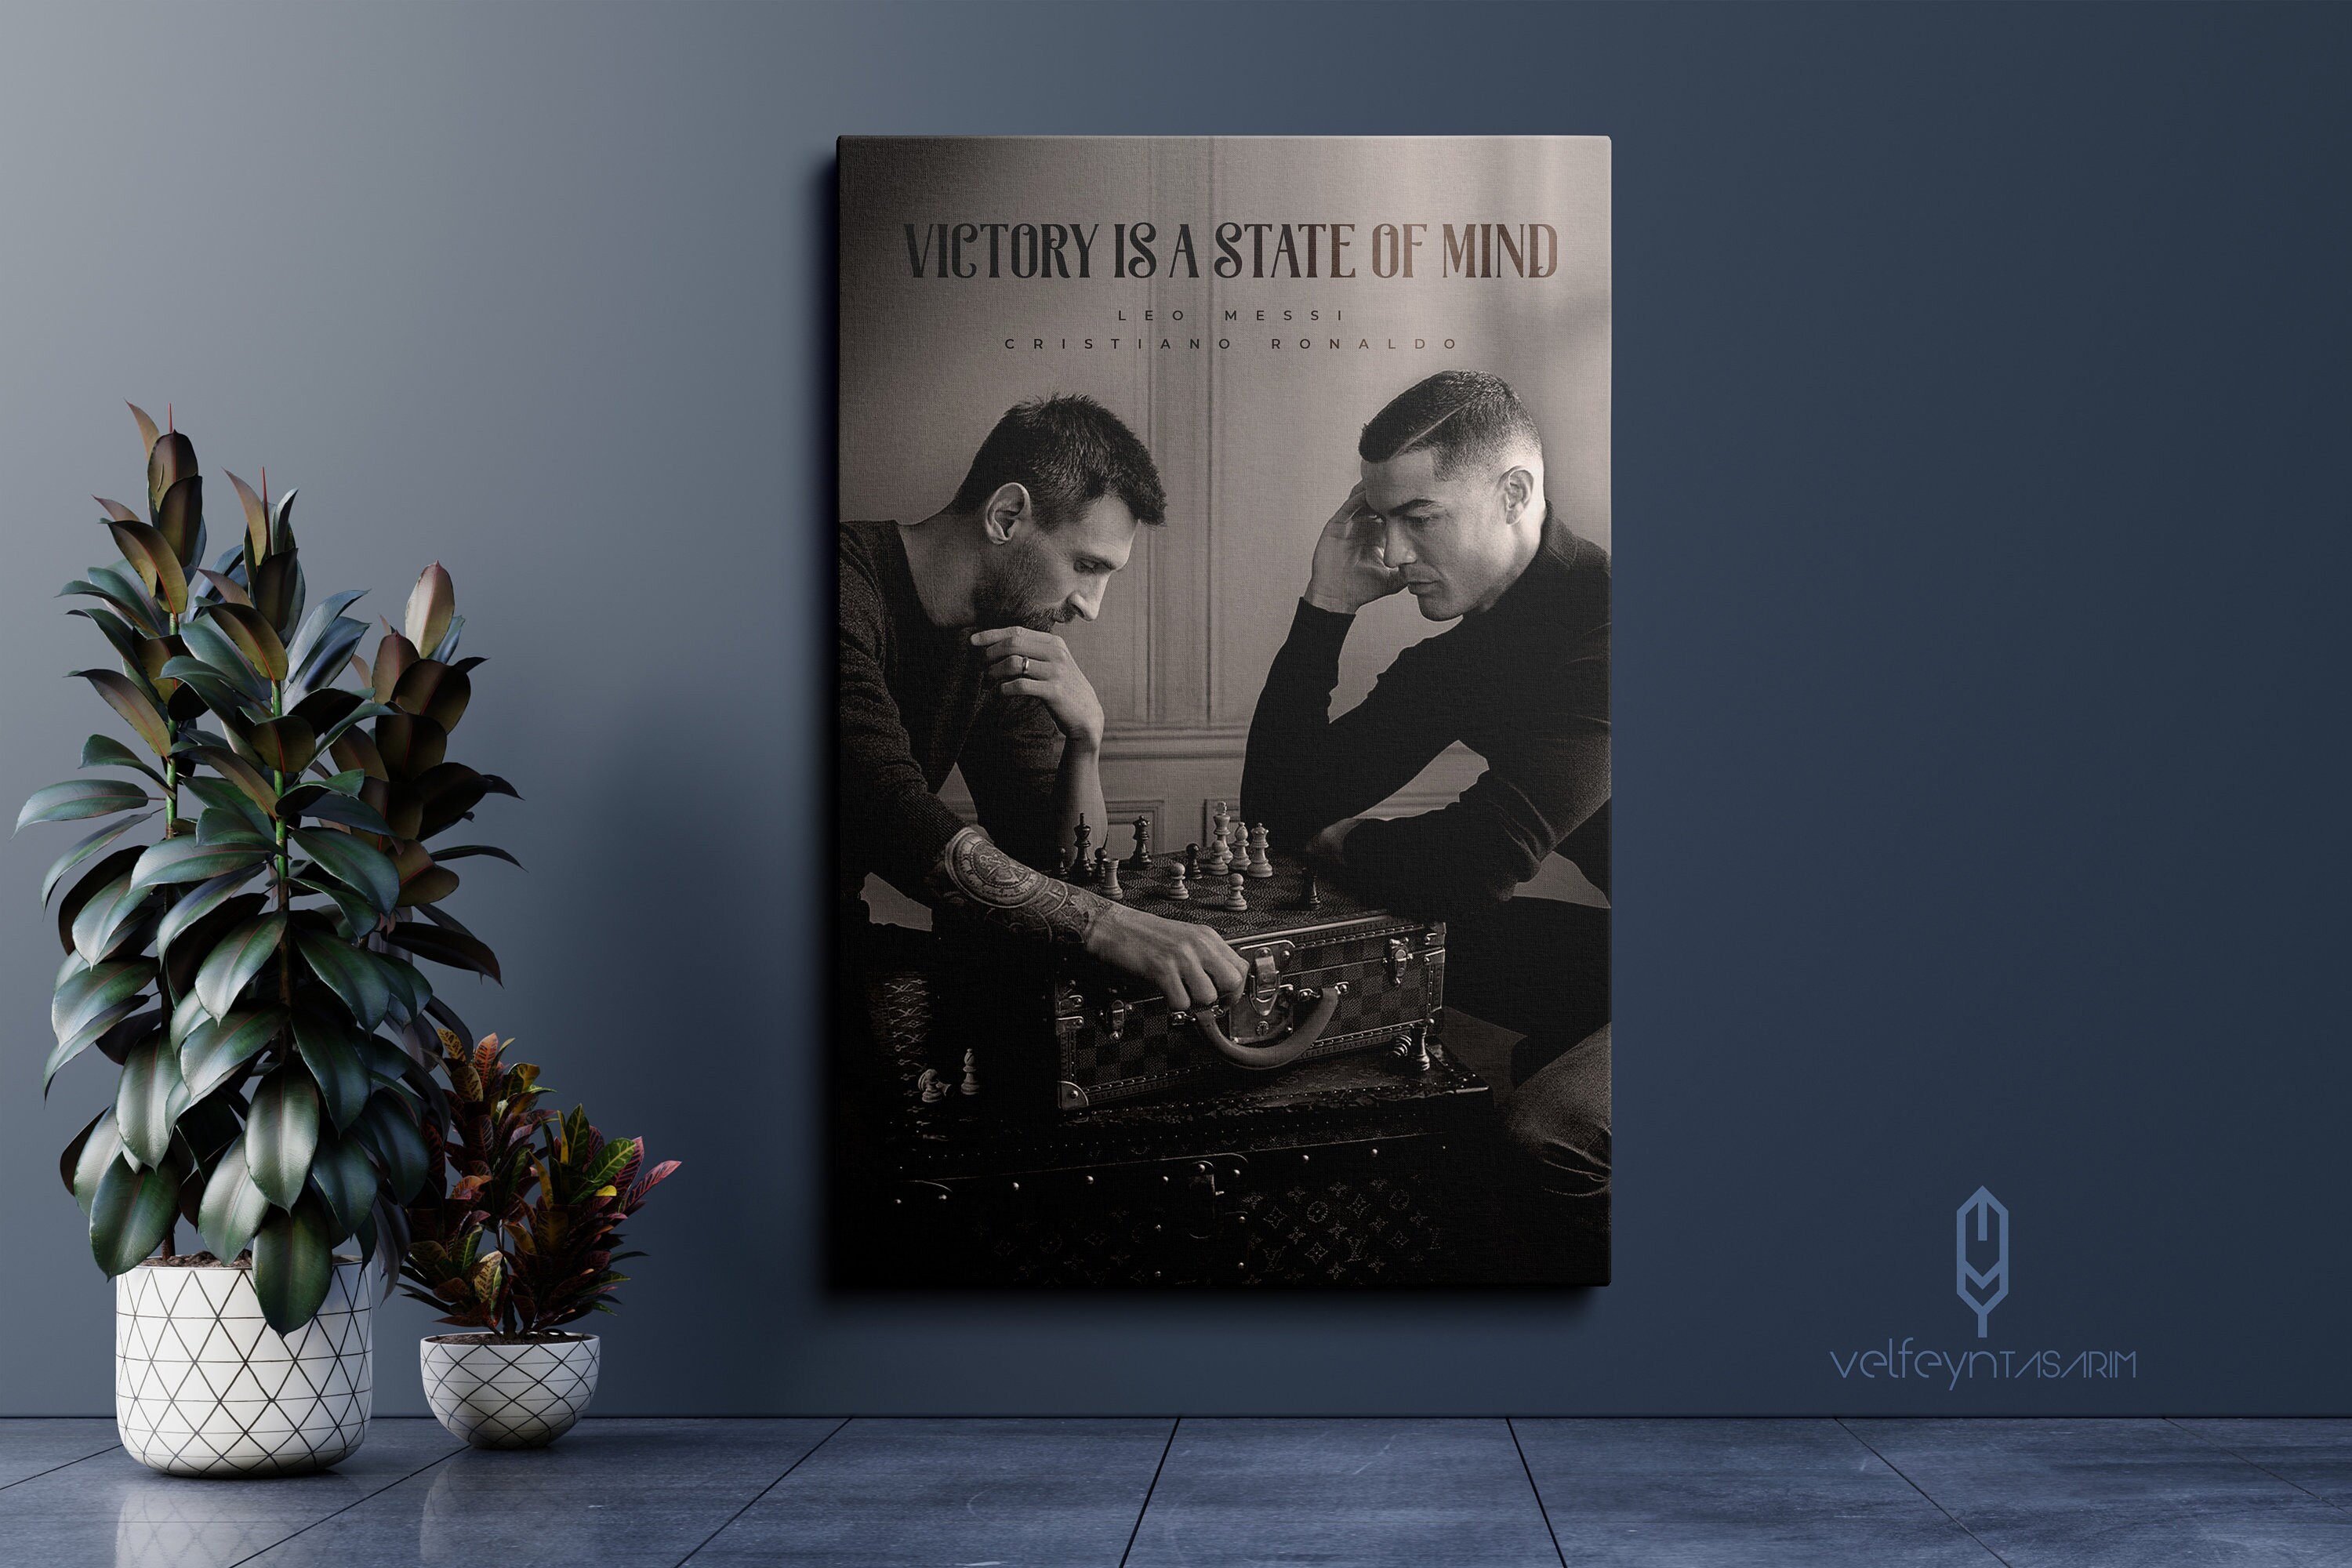 Lionel Messi and Cristiano Ronaldo Play Chess 2022 Poster